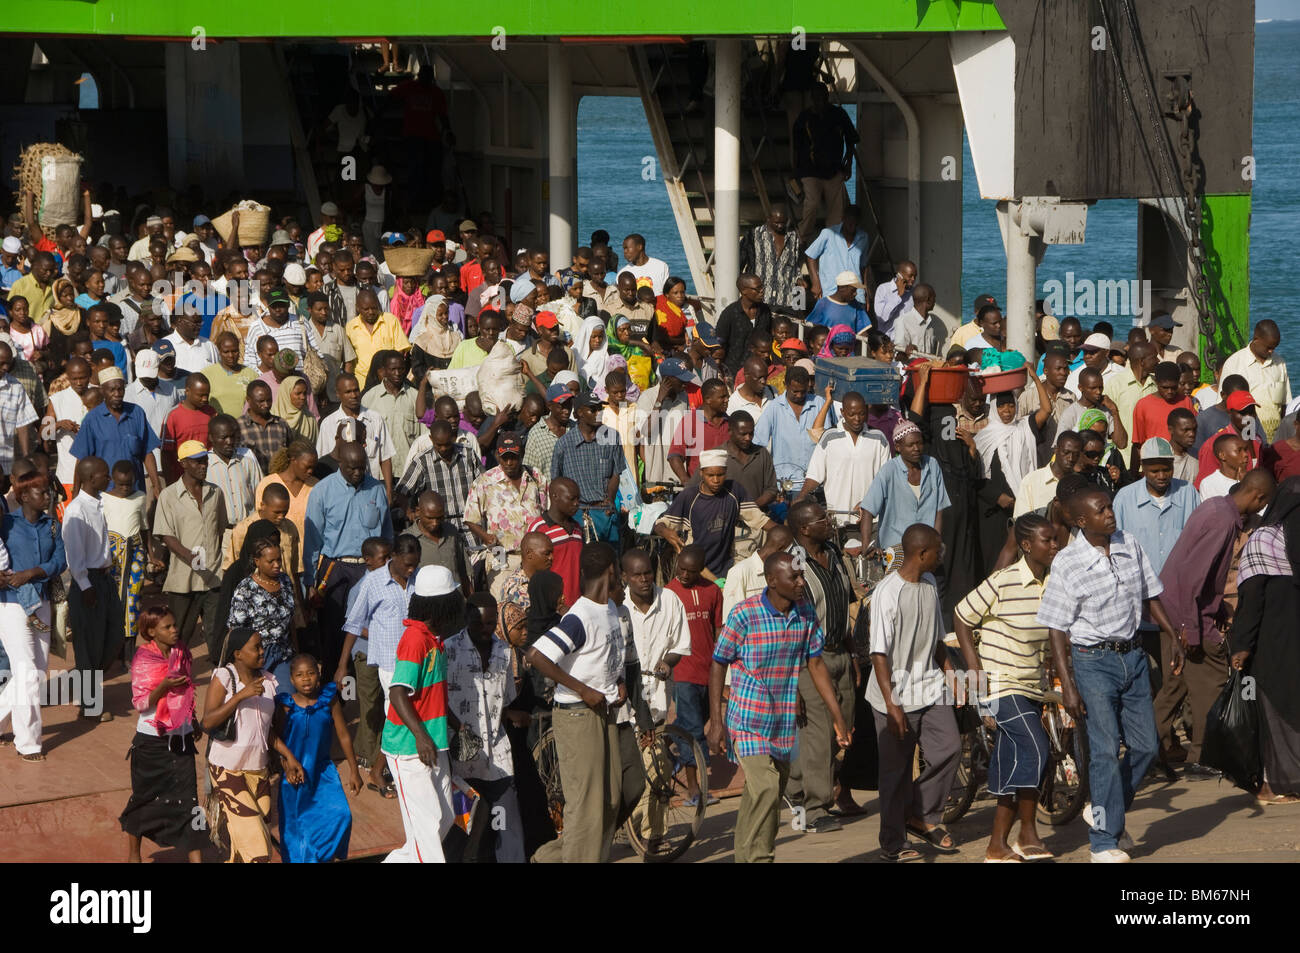 People disembarking from a ferry, Mombasa harbor, Kenya, East Africa Stock Photo